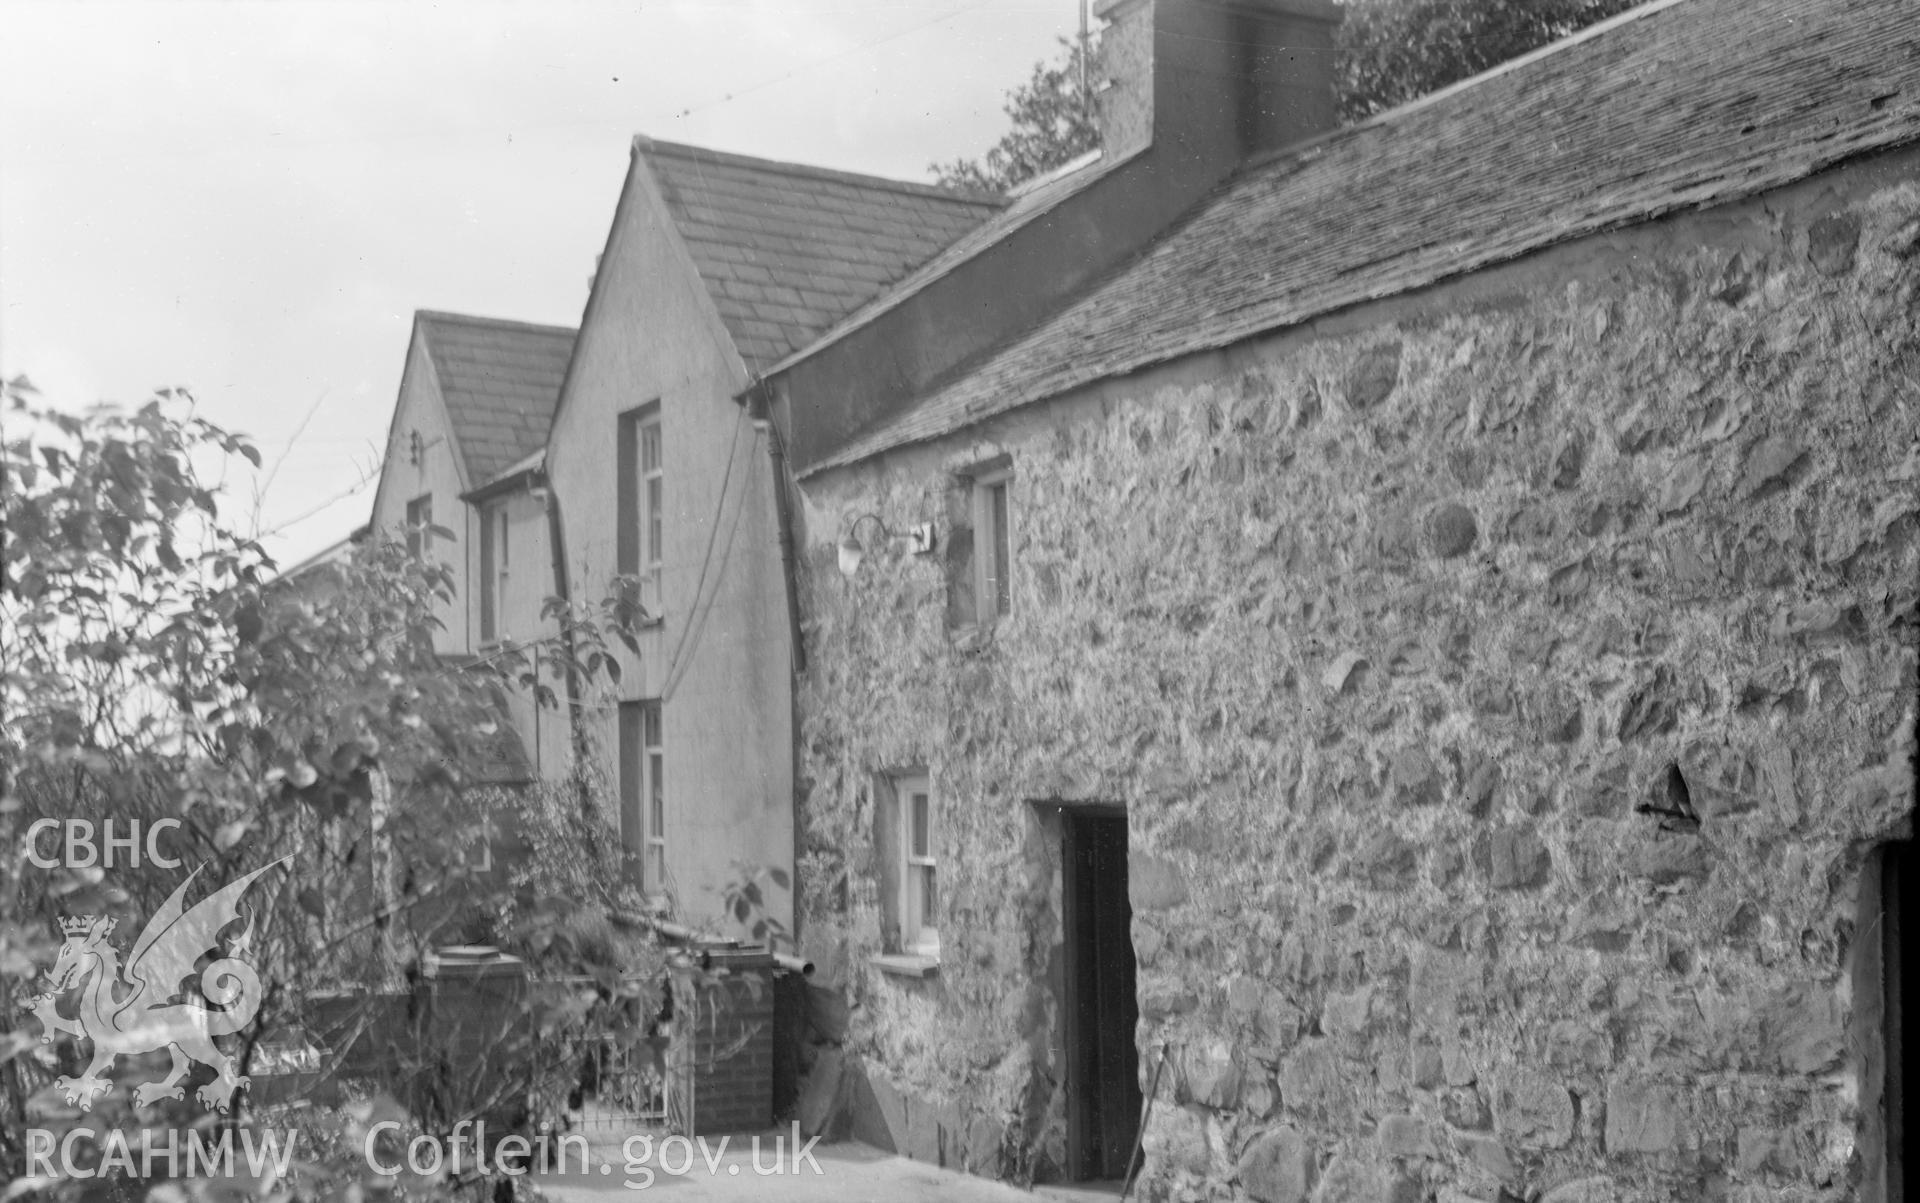 Black and white nitrate negative showing exterior view of Plas, Llannor.